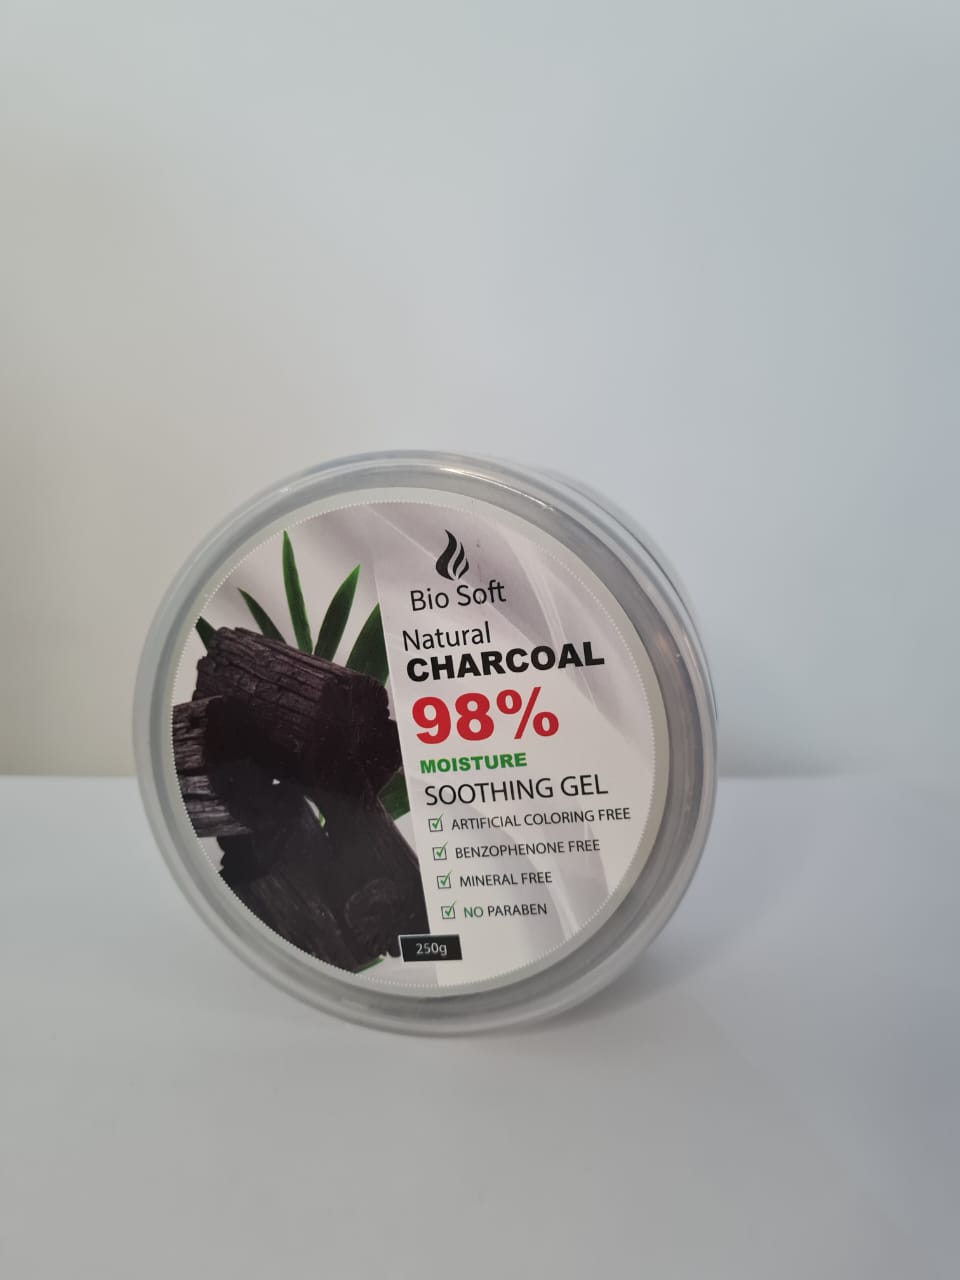 Soothing Gel with Natural CHARCOAL